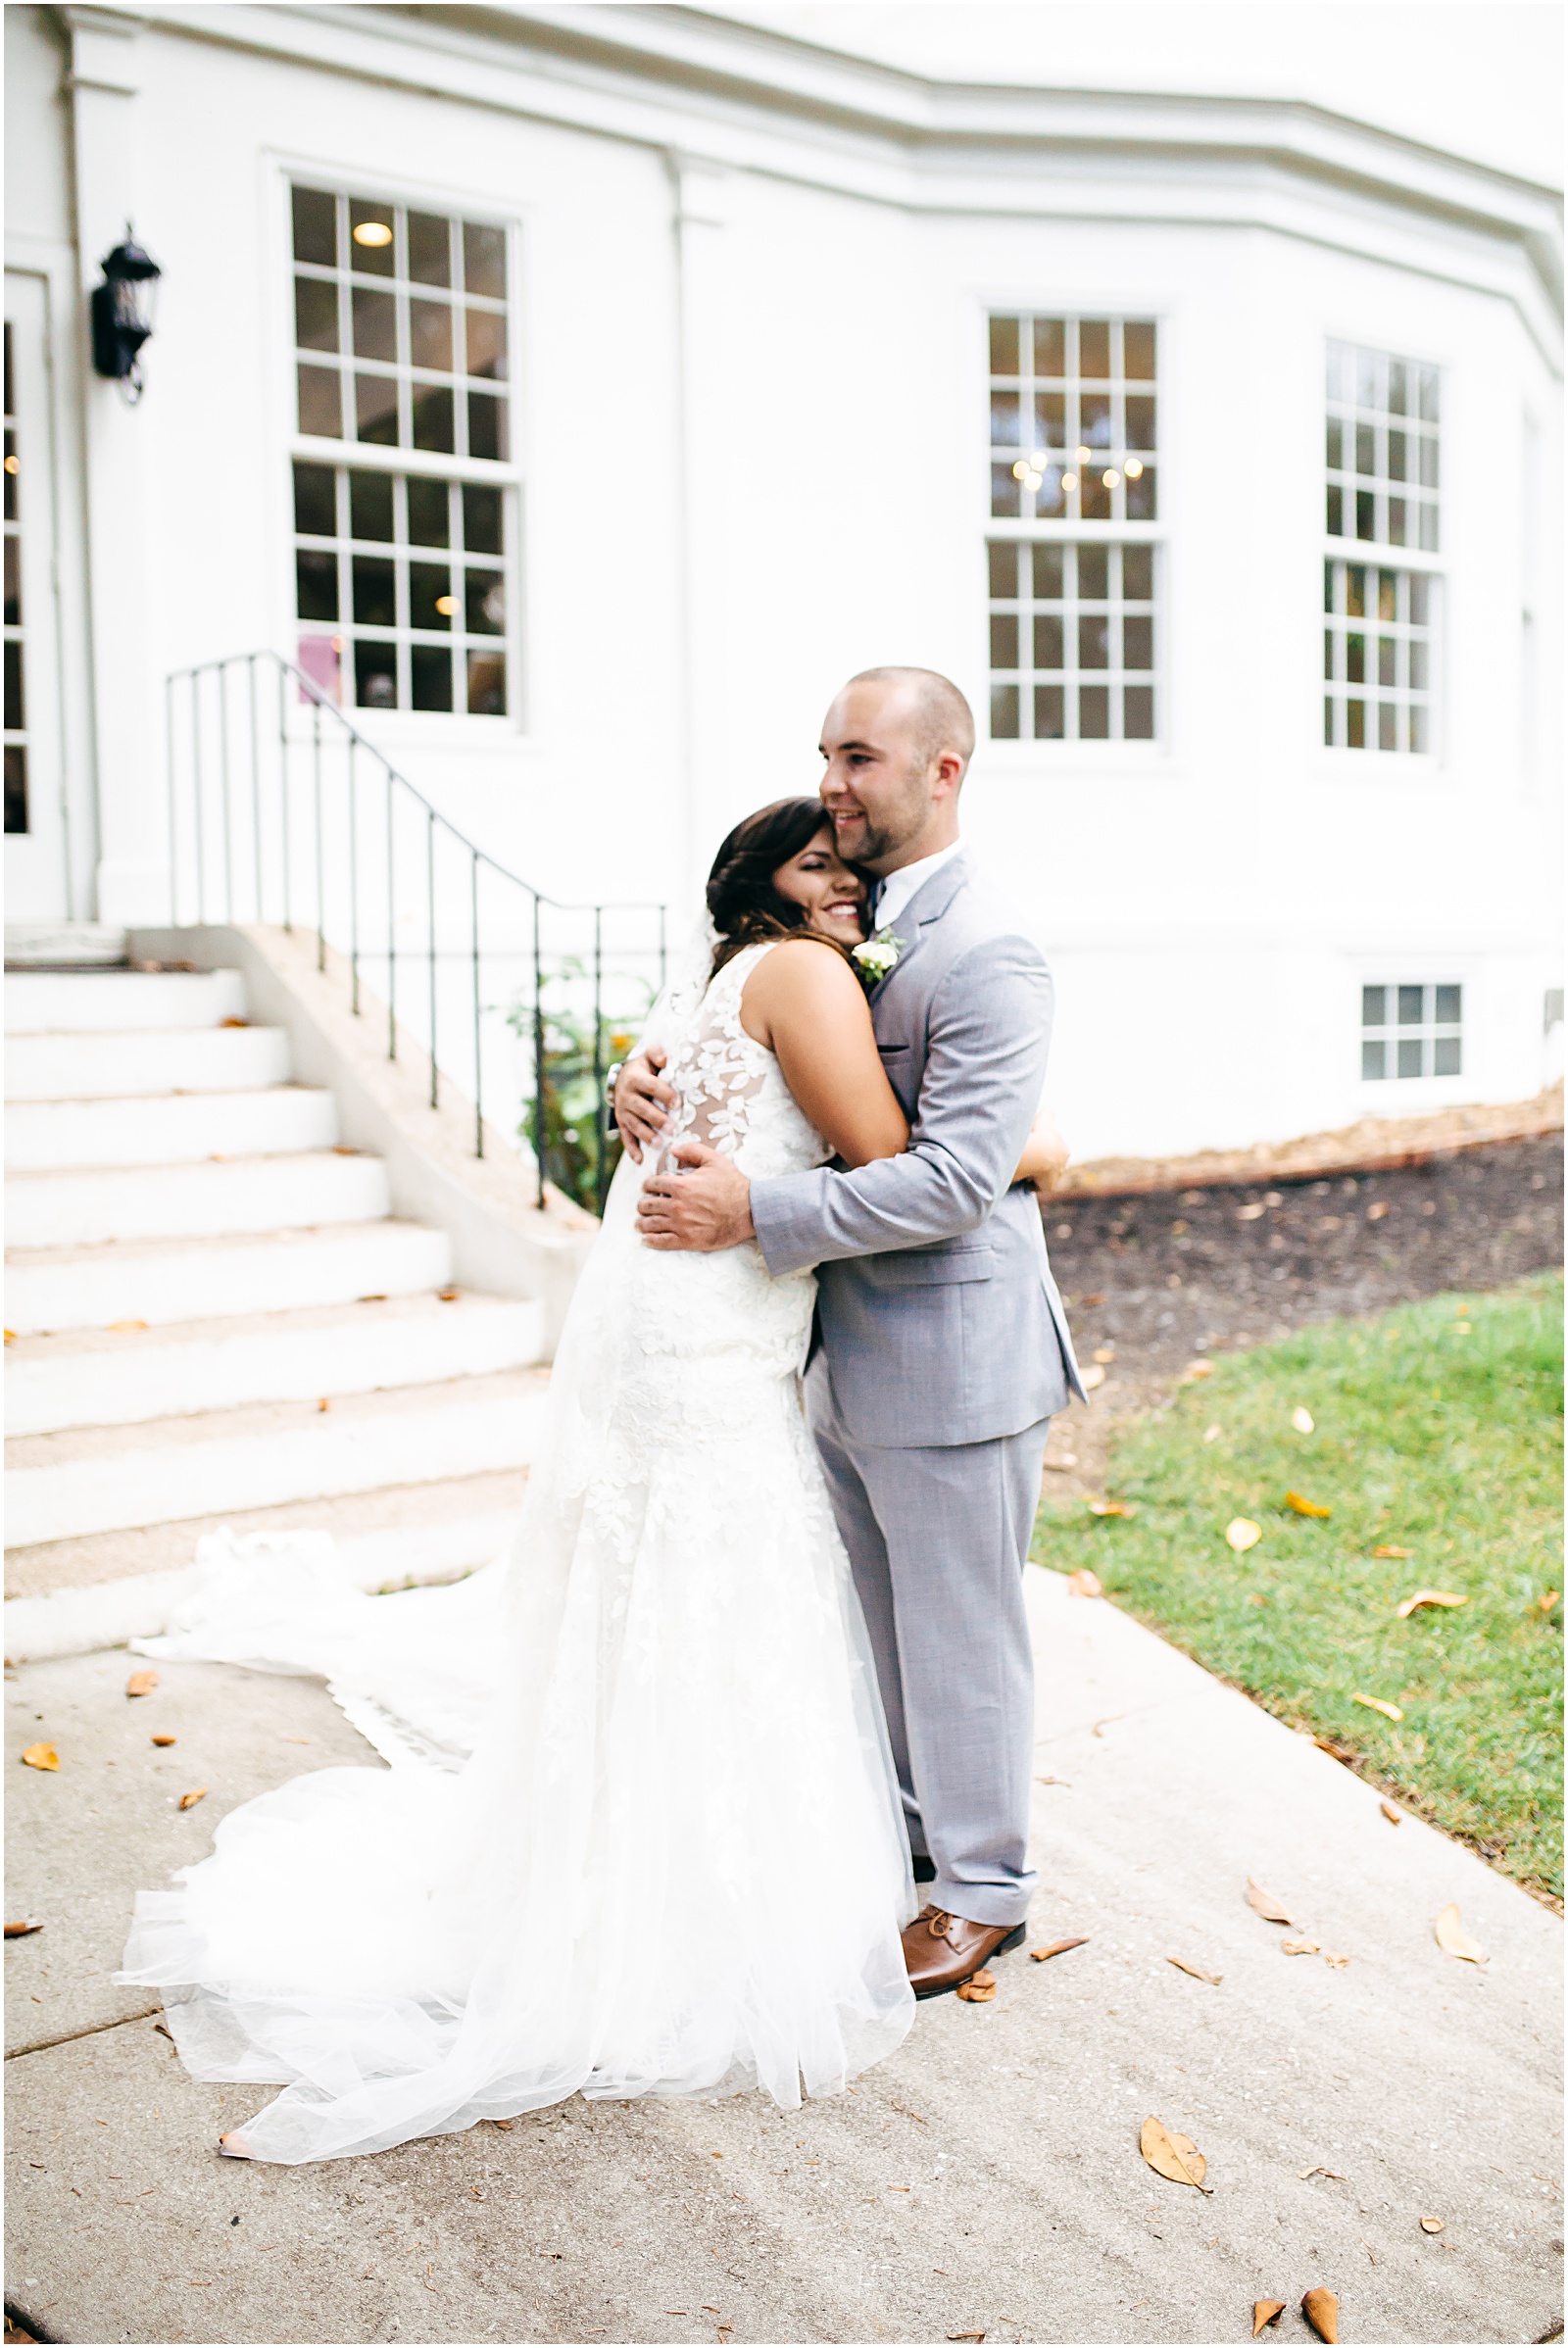 Amber Lowe Photo,Crescent Bend,Knoxville,Knoxville Photographer,Knoxville Wedding Photographer,University of Tennessee Football,